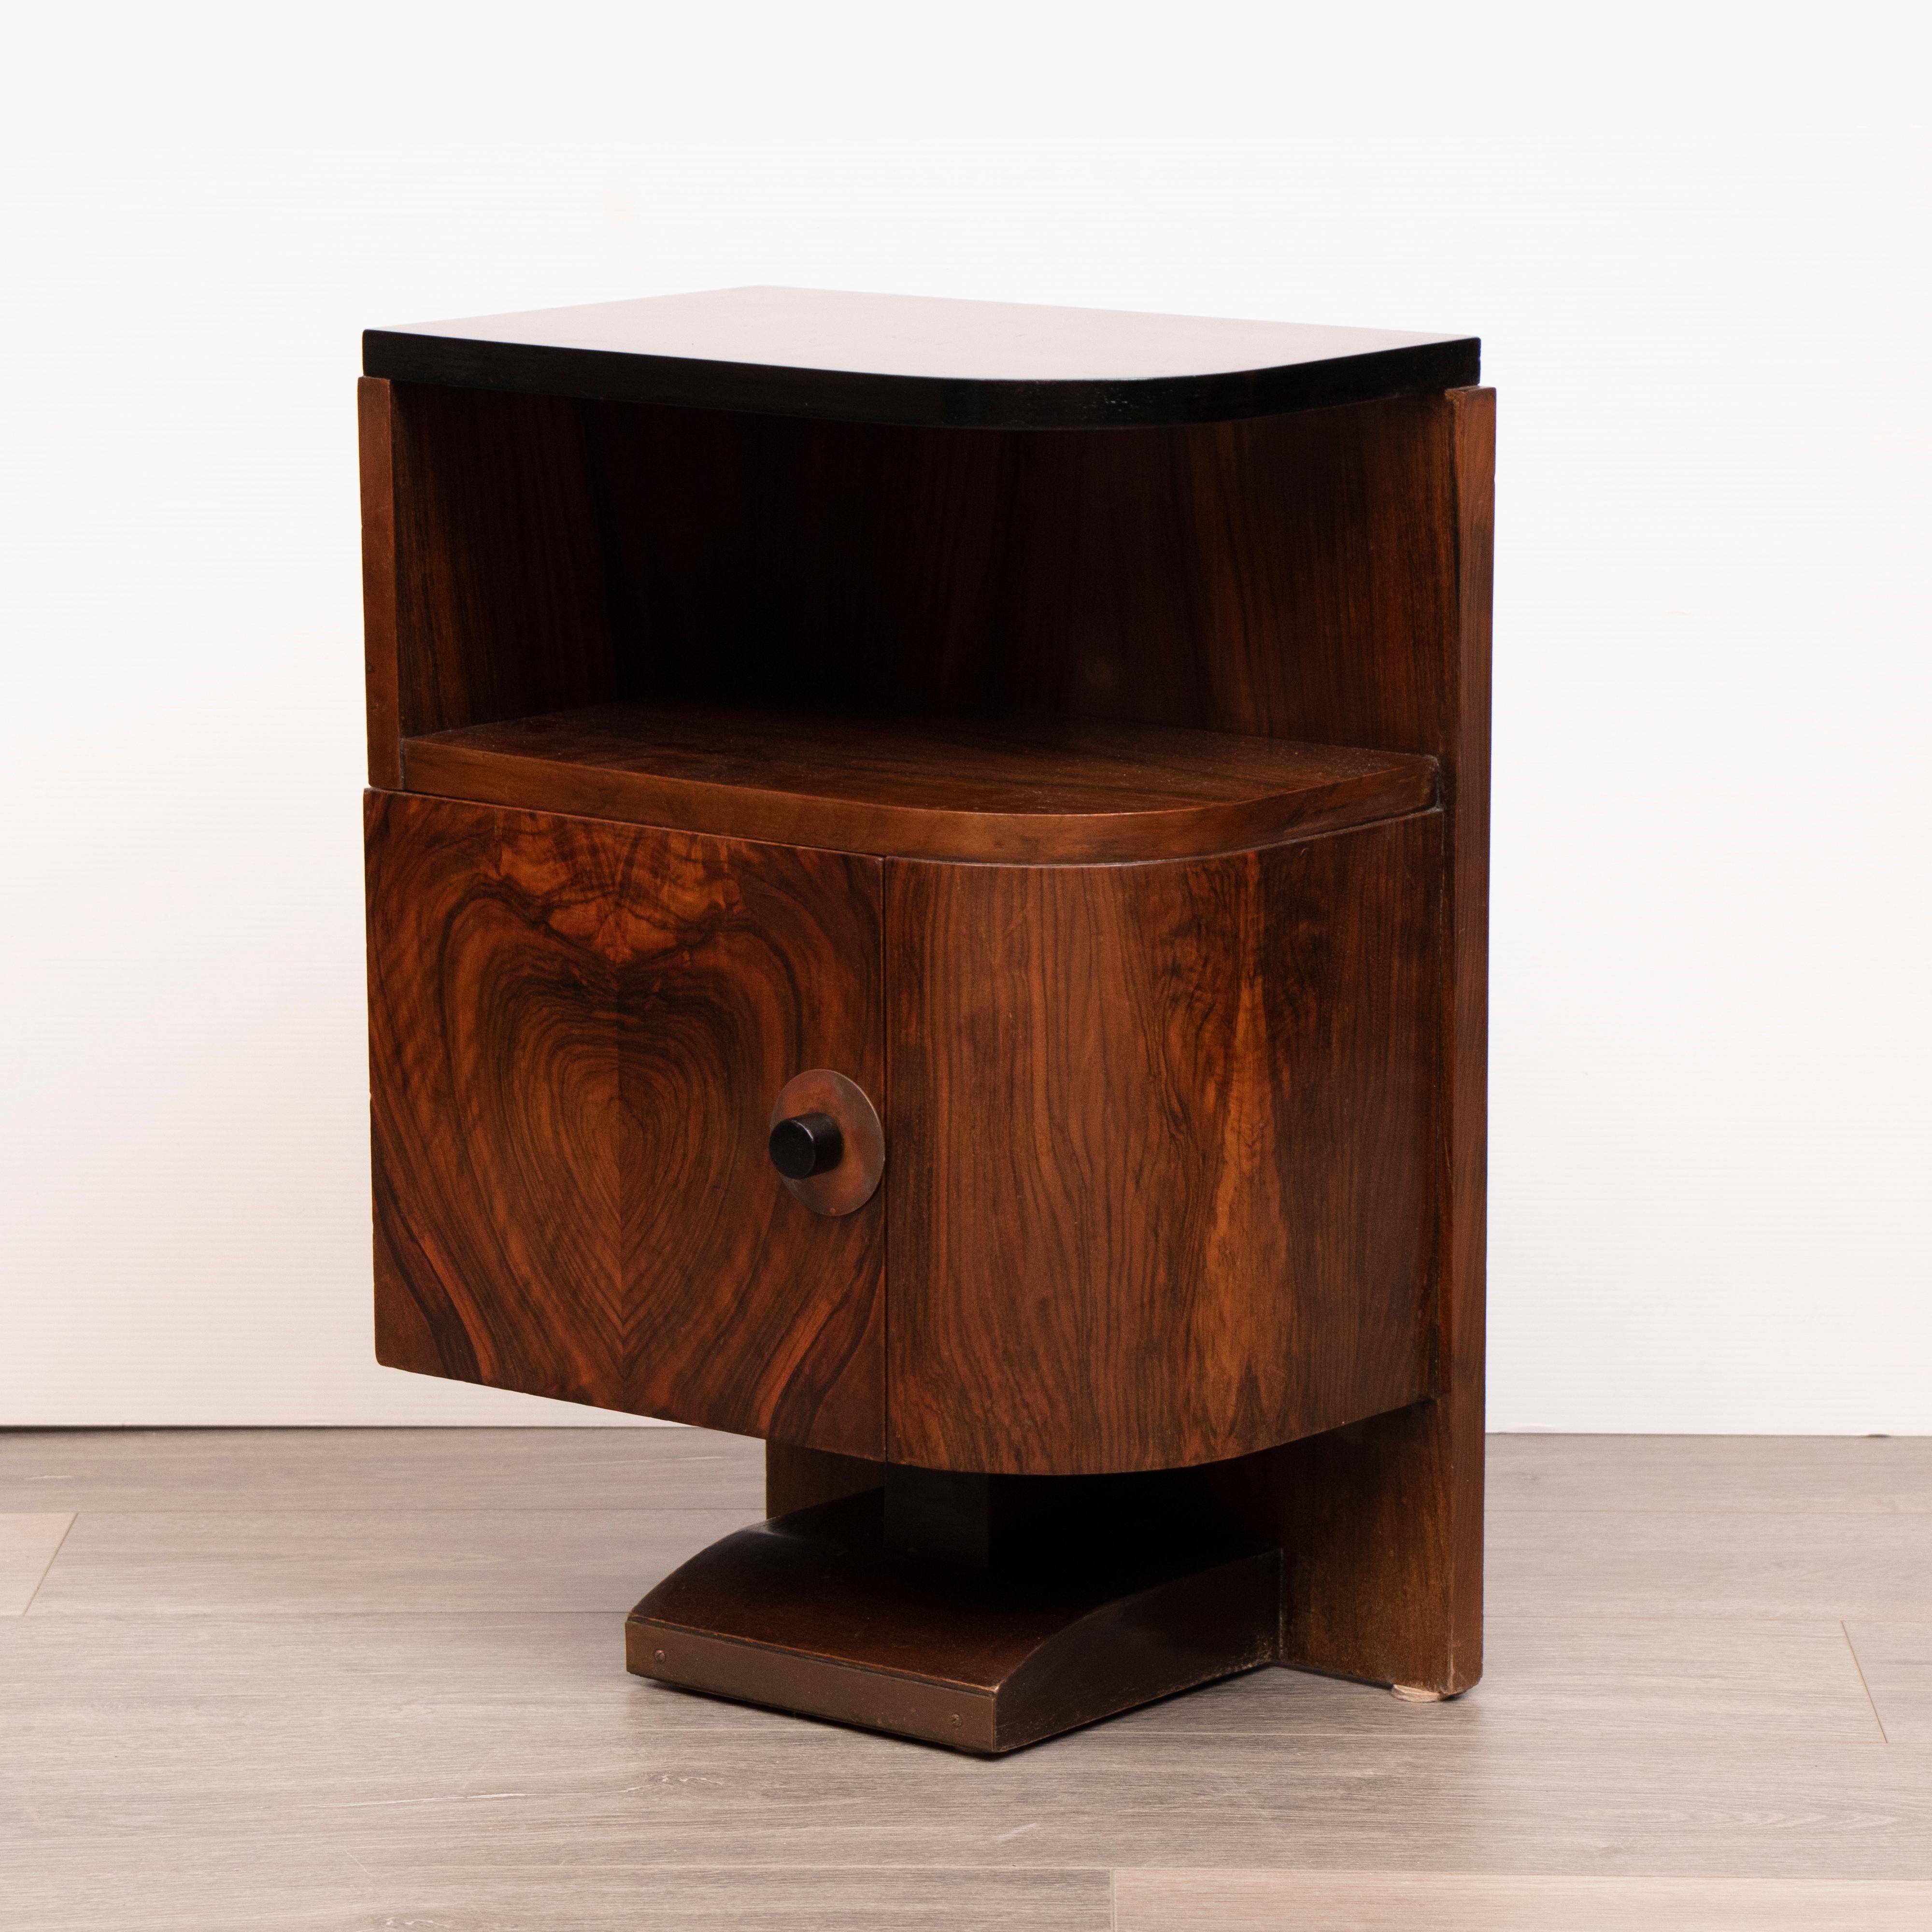 A pair of French 1930s Art Deco Walnut bedside tables or nightstands. The tops of each table have recently been refinished with a black lacquer paint. A space sits beneath each top where magazines can be stored. A single door opens on each cabinet